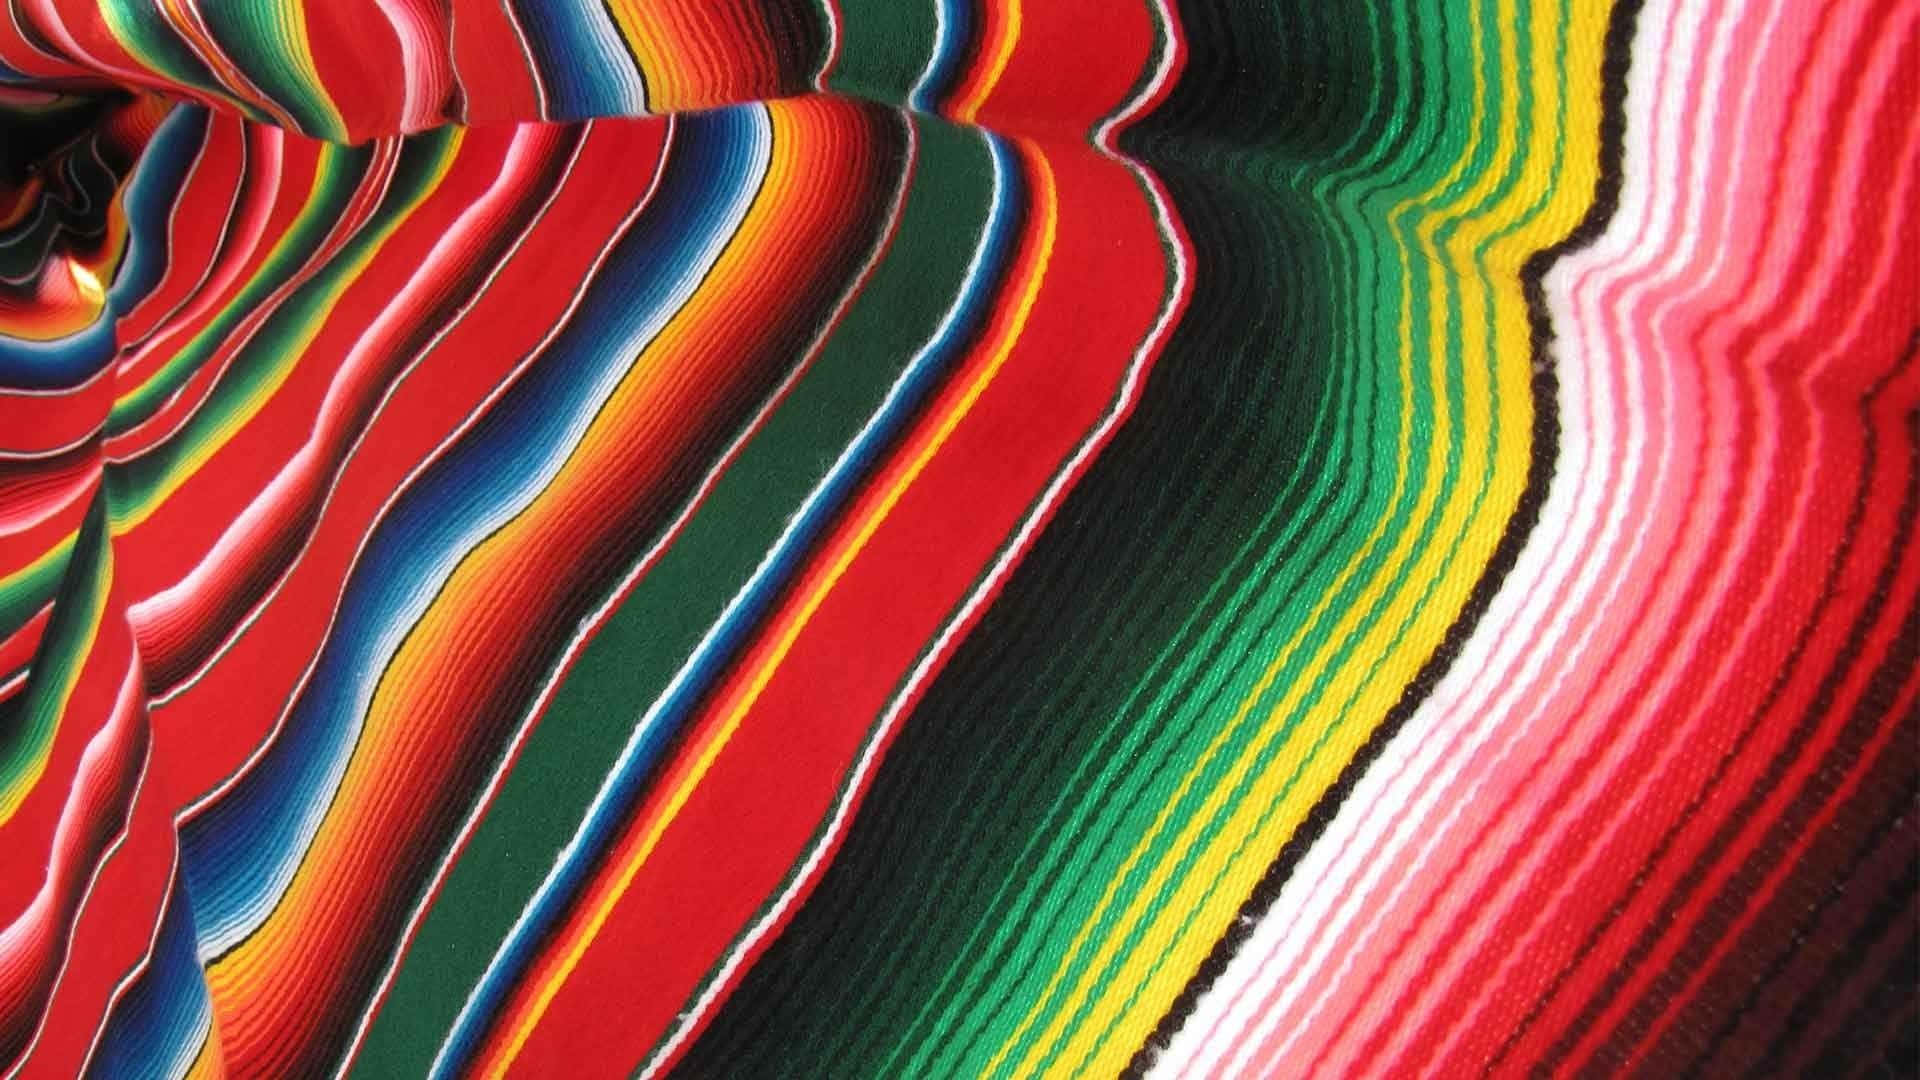 Traditional Fiesta Mexican Blanket Background